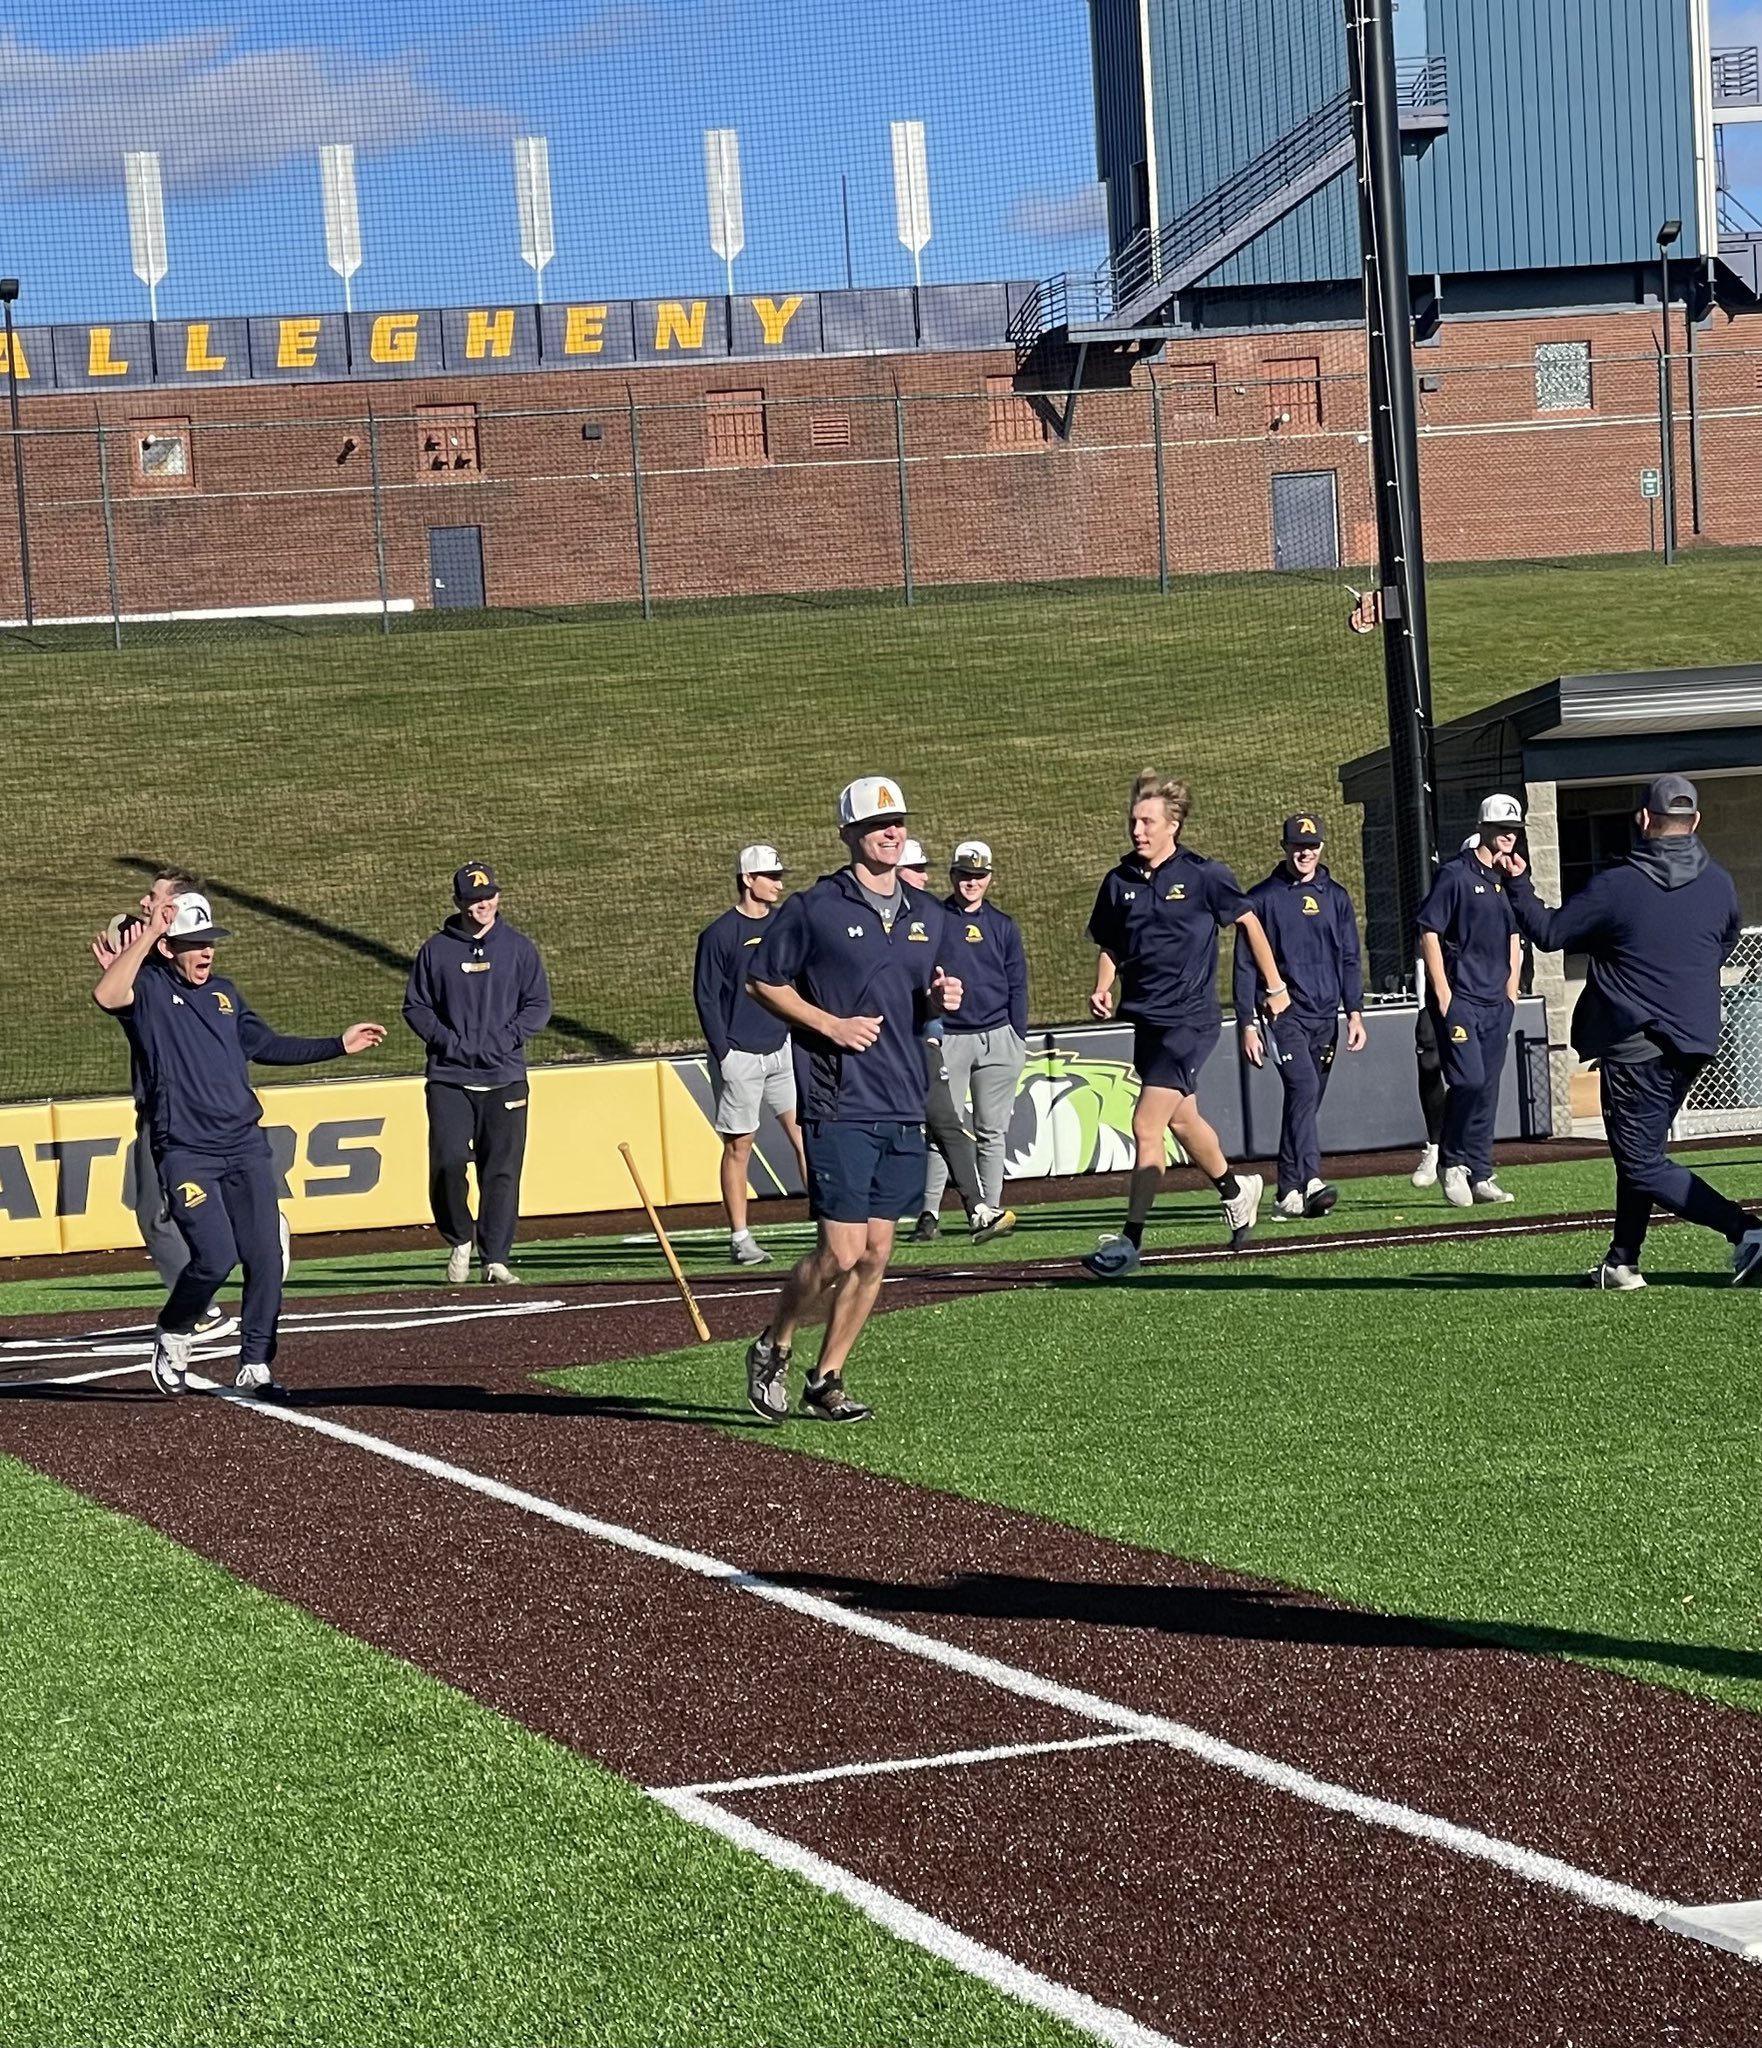 The New Navy drip. 🔥👀 - Allegheny College Baseball